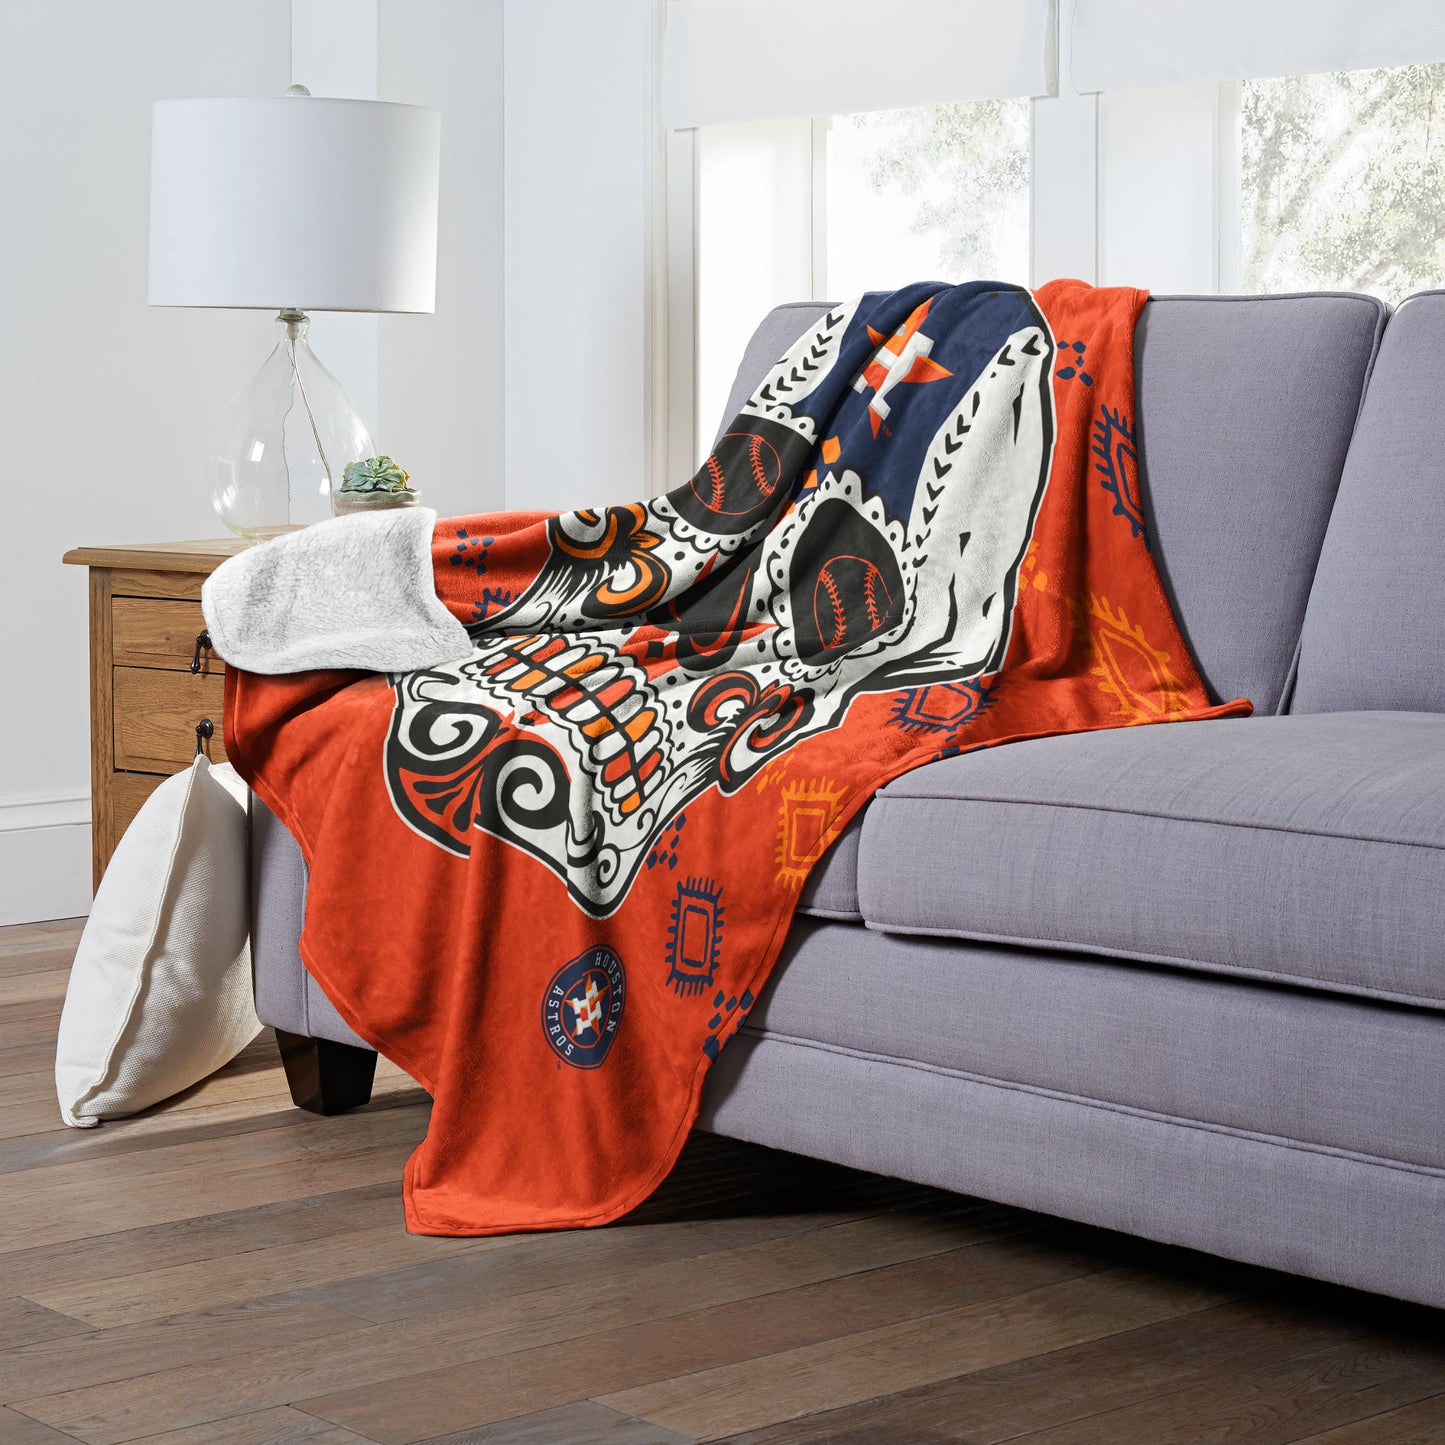 CANDY SKULL - ASTROS Silk Touch Sherpa Blanket 50"x60"